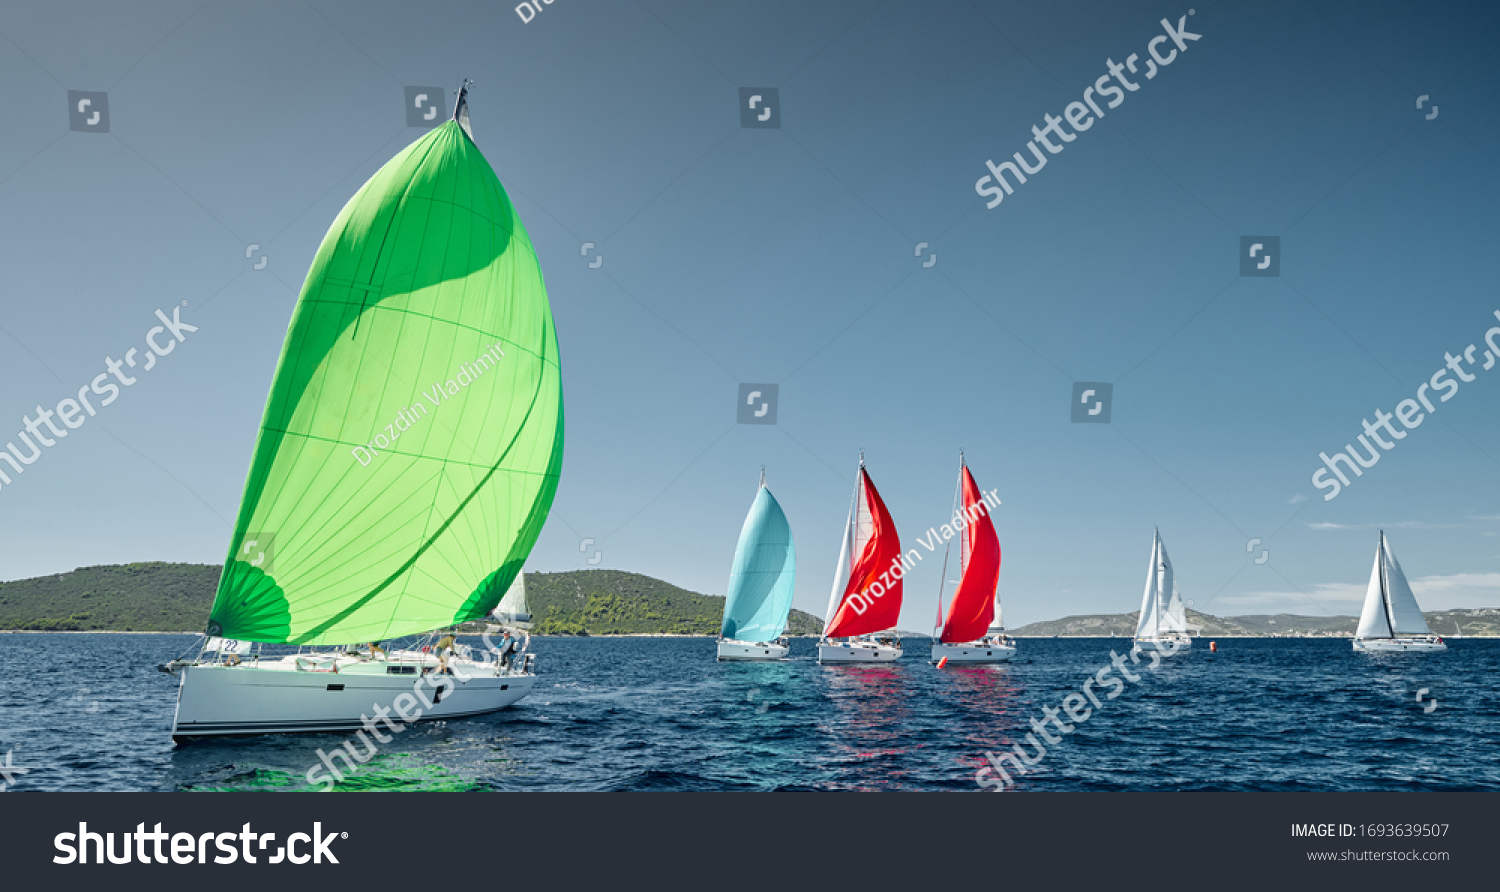 Sailboats compete in a sail regatta at sunset, race of sailboats, reflection of sails on water, multicolored spinnakers, number of boat is on aft boats, island is on background, clear weather #1693639507